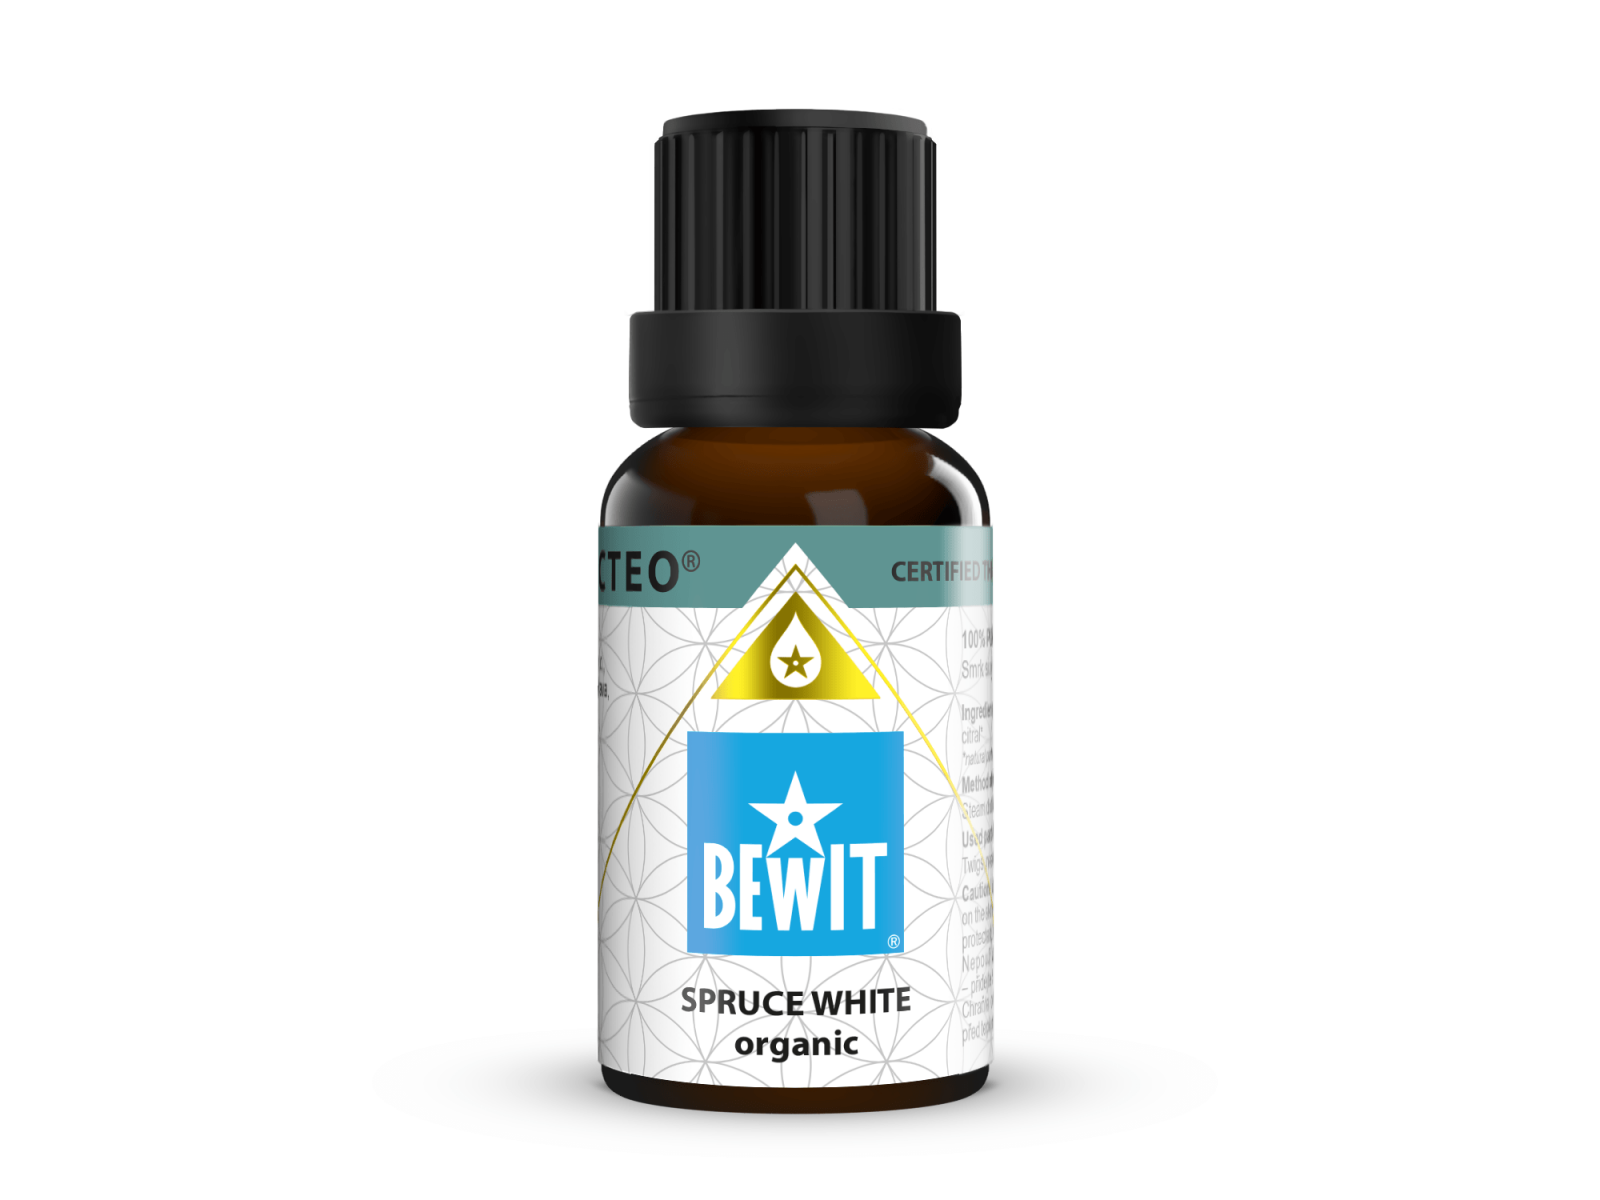 BEWIT White spruce ORGANIC - 100% pure and natural CTEO® essential oil - 3